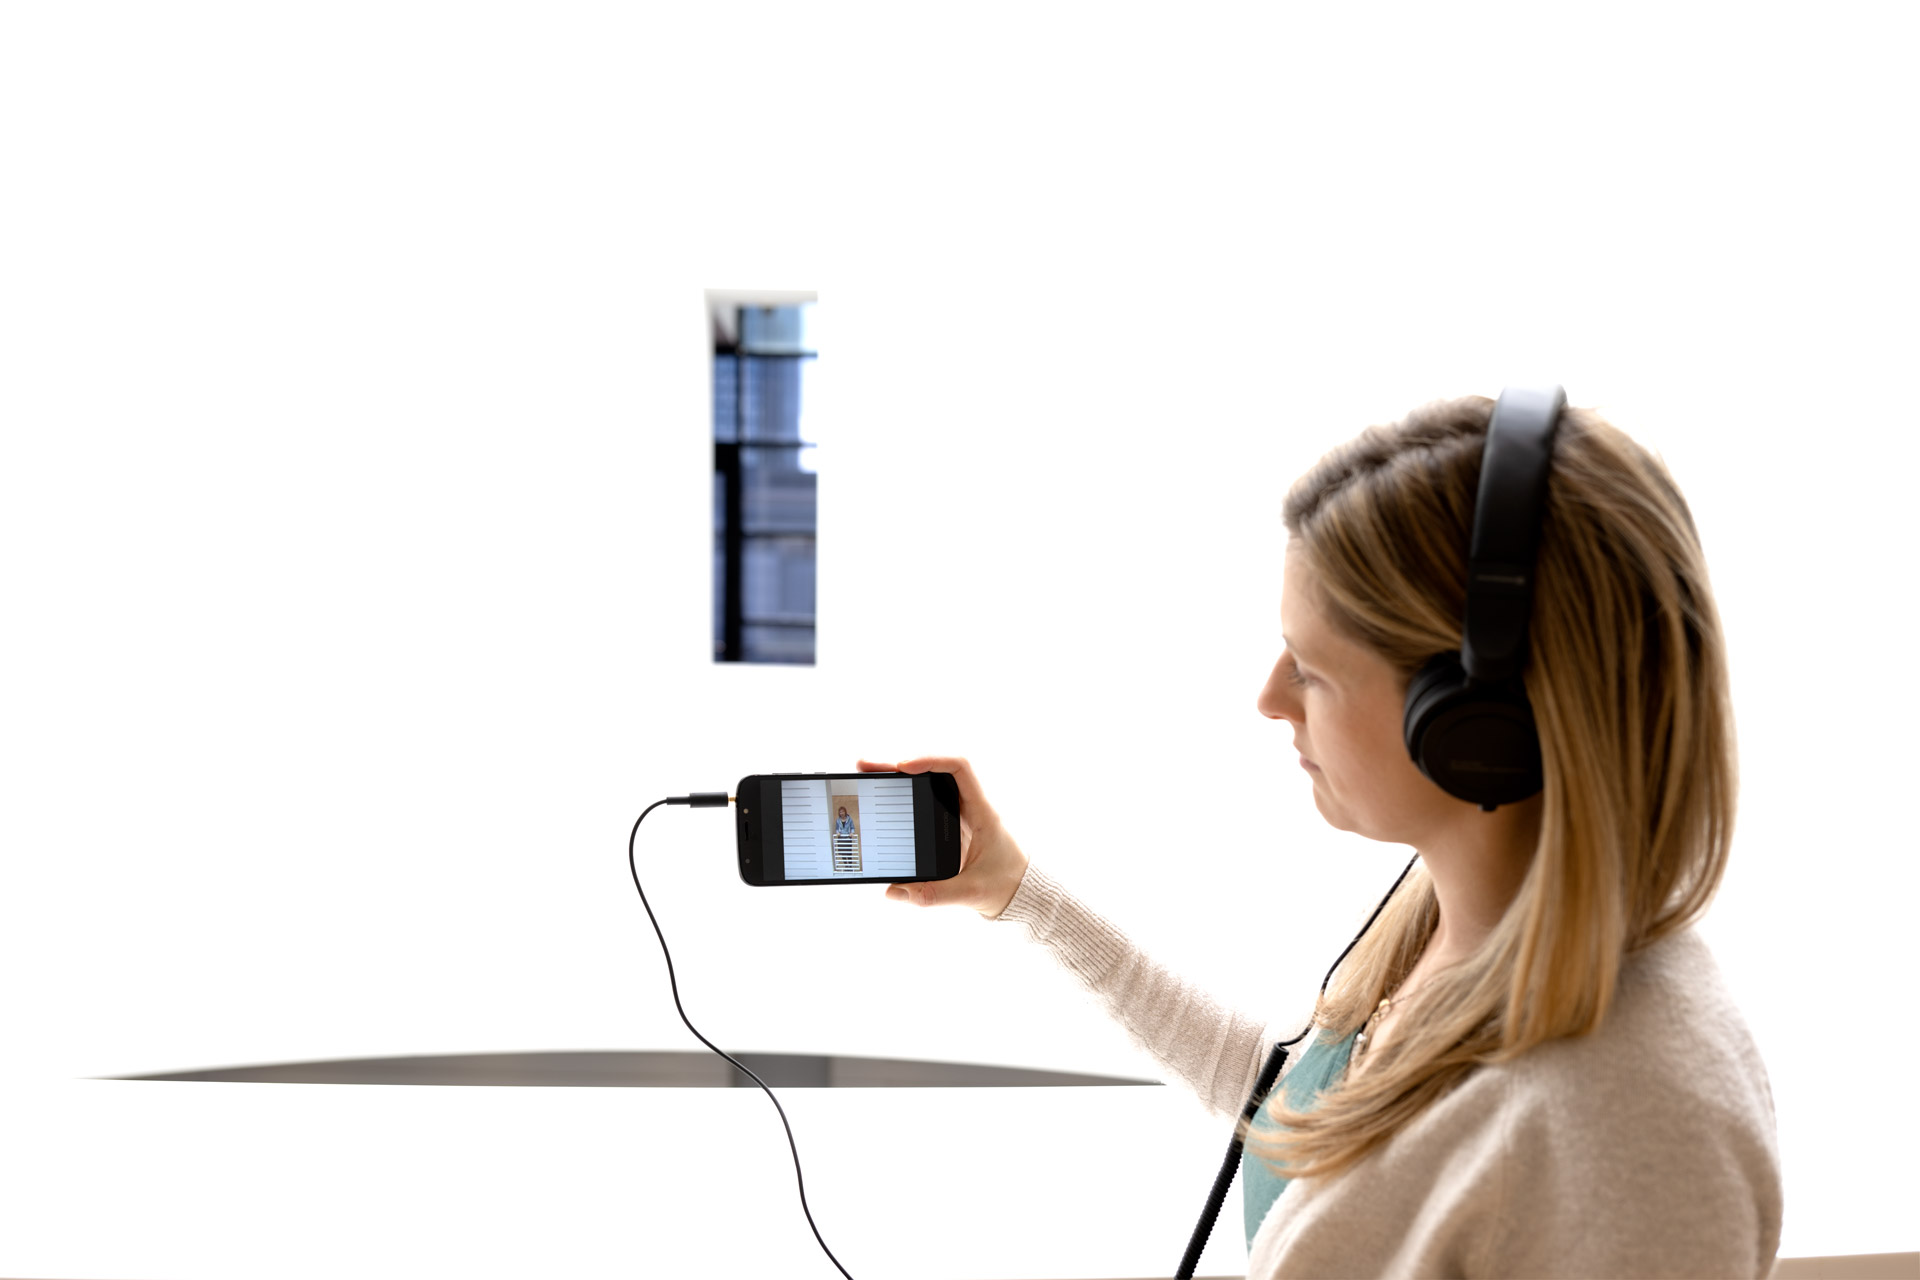 Photo of a person wearing headphones holding up a smartphone screen